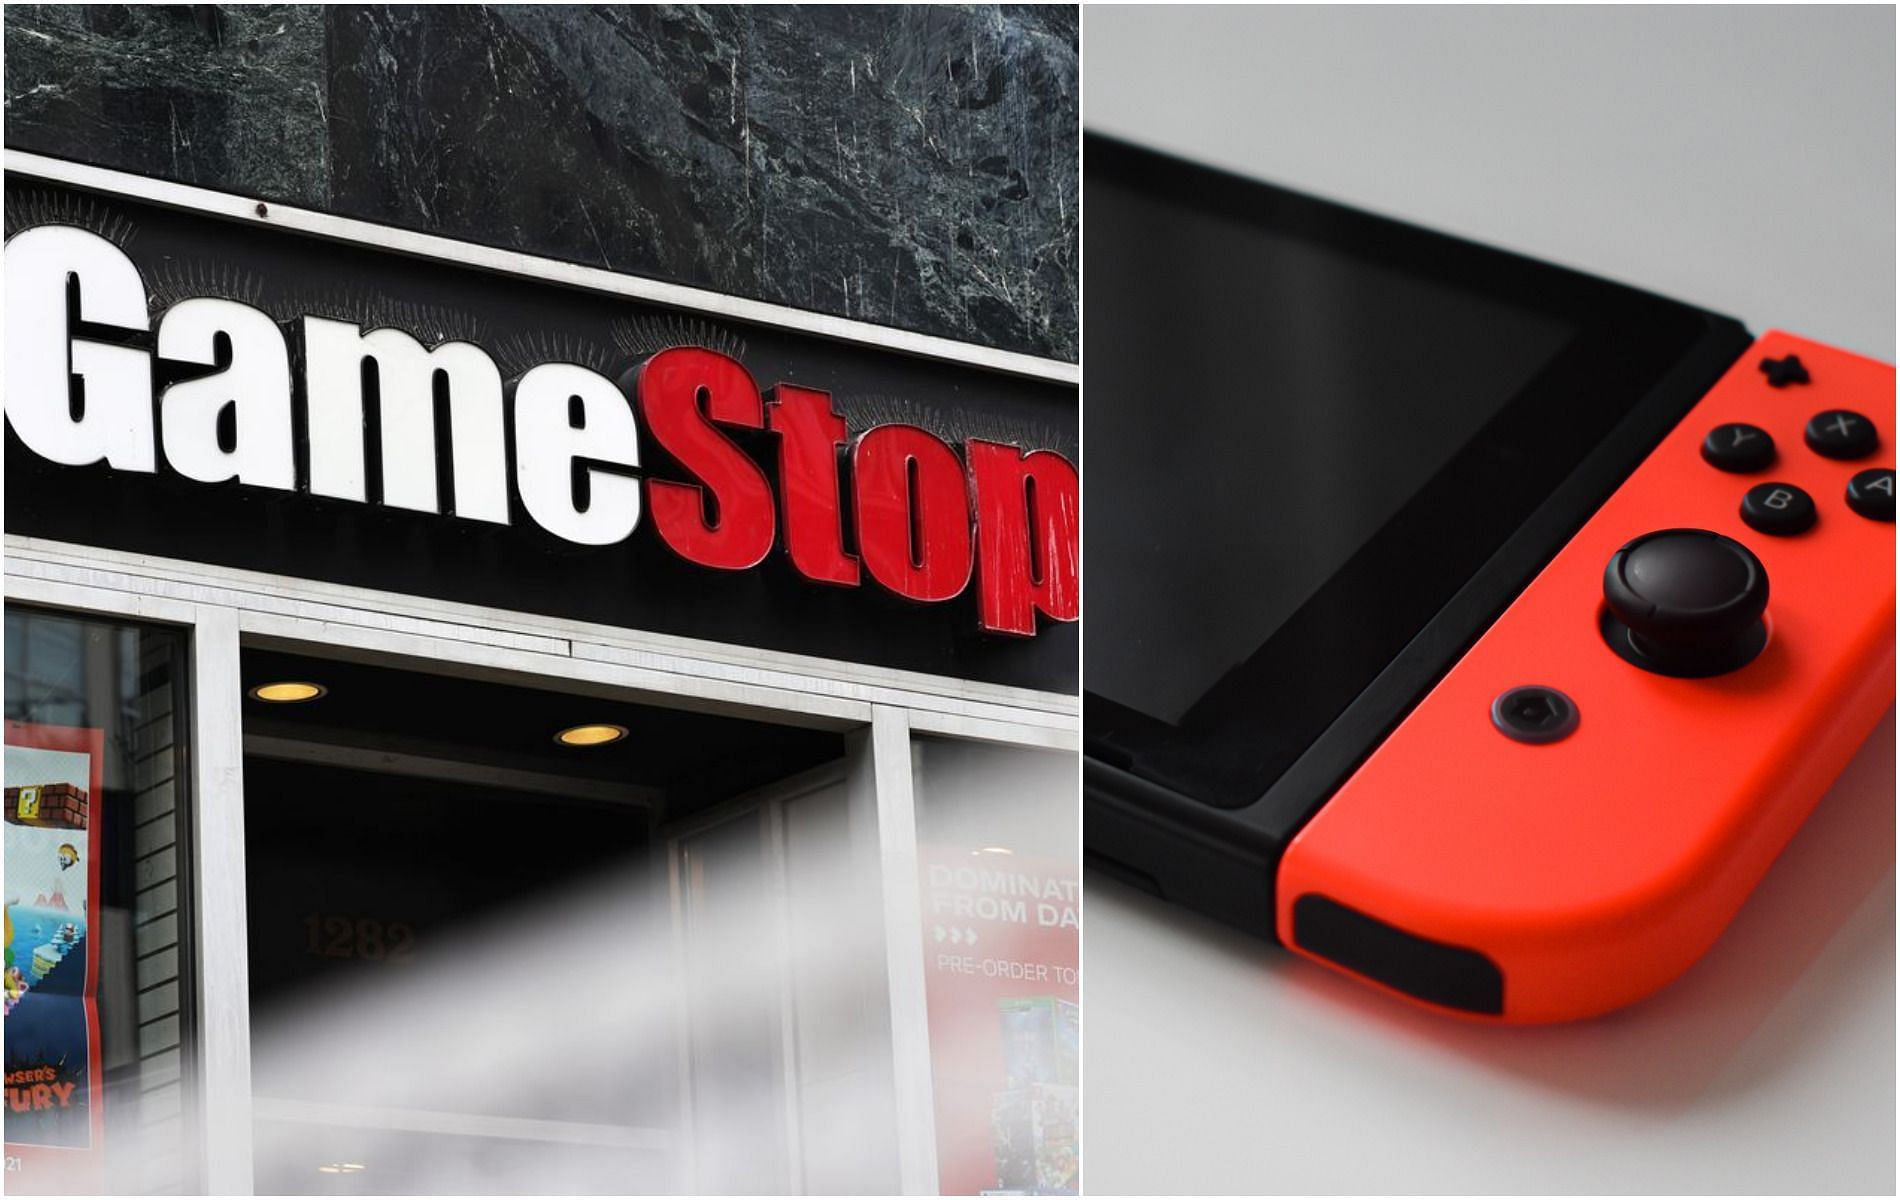 Here's the best deals on Nintendo Switch games for Gamestop's ongoing sale